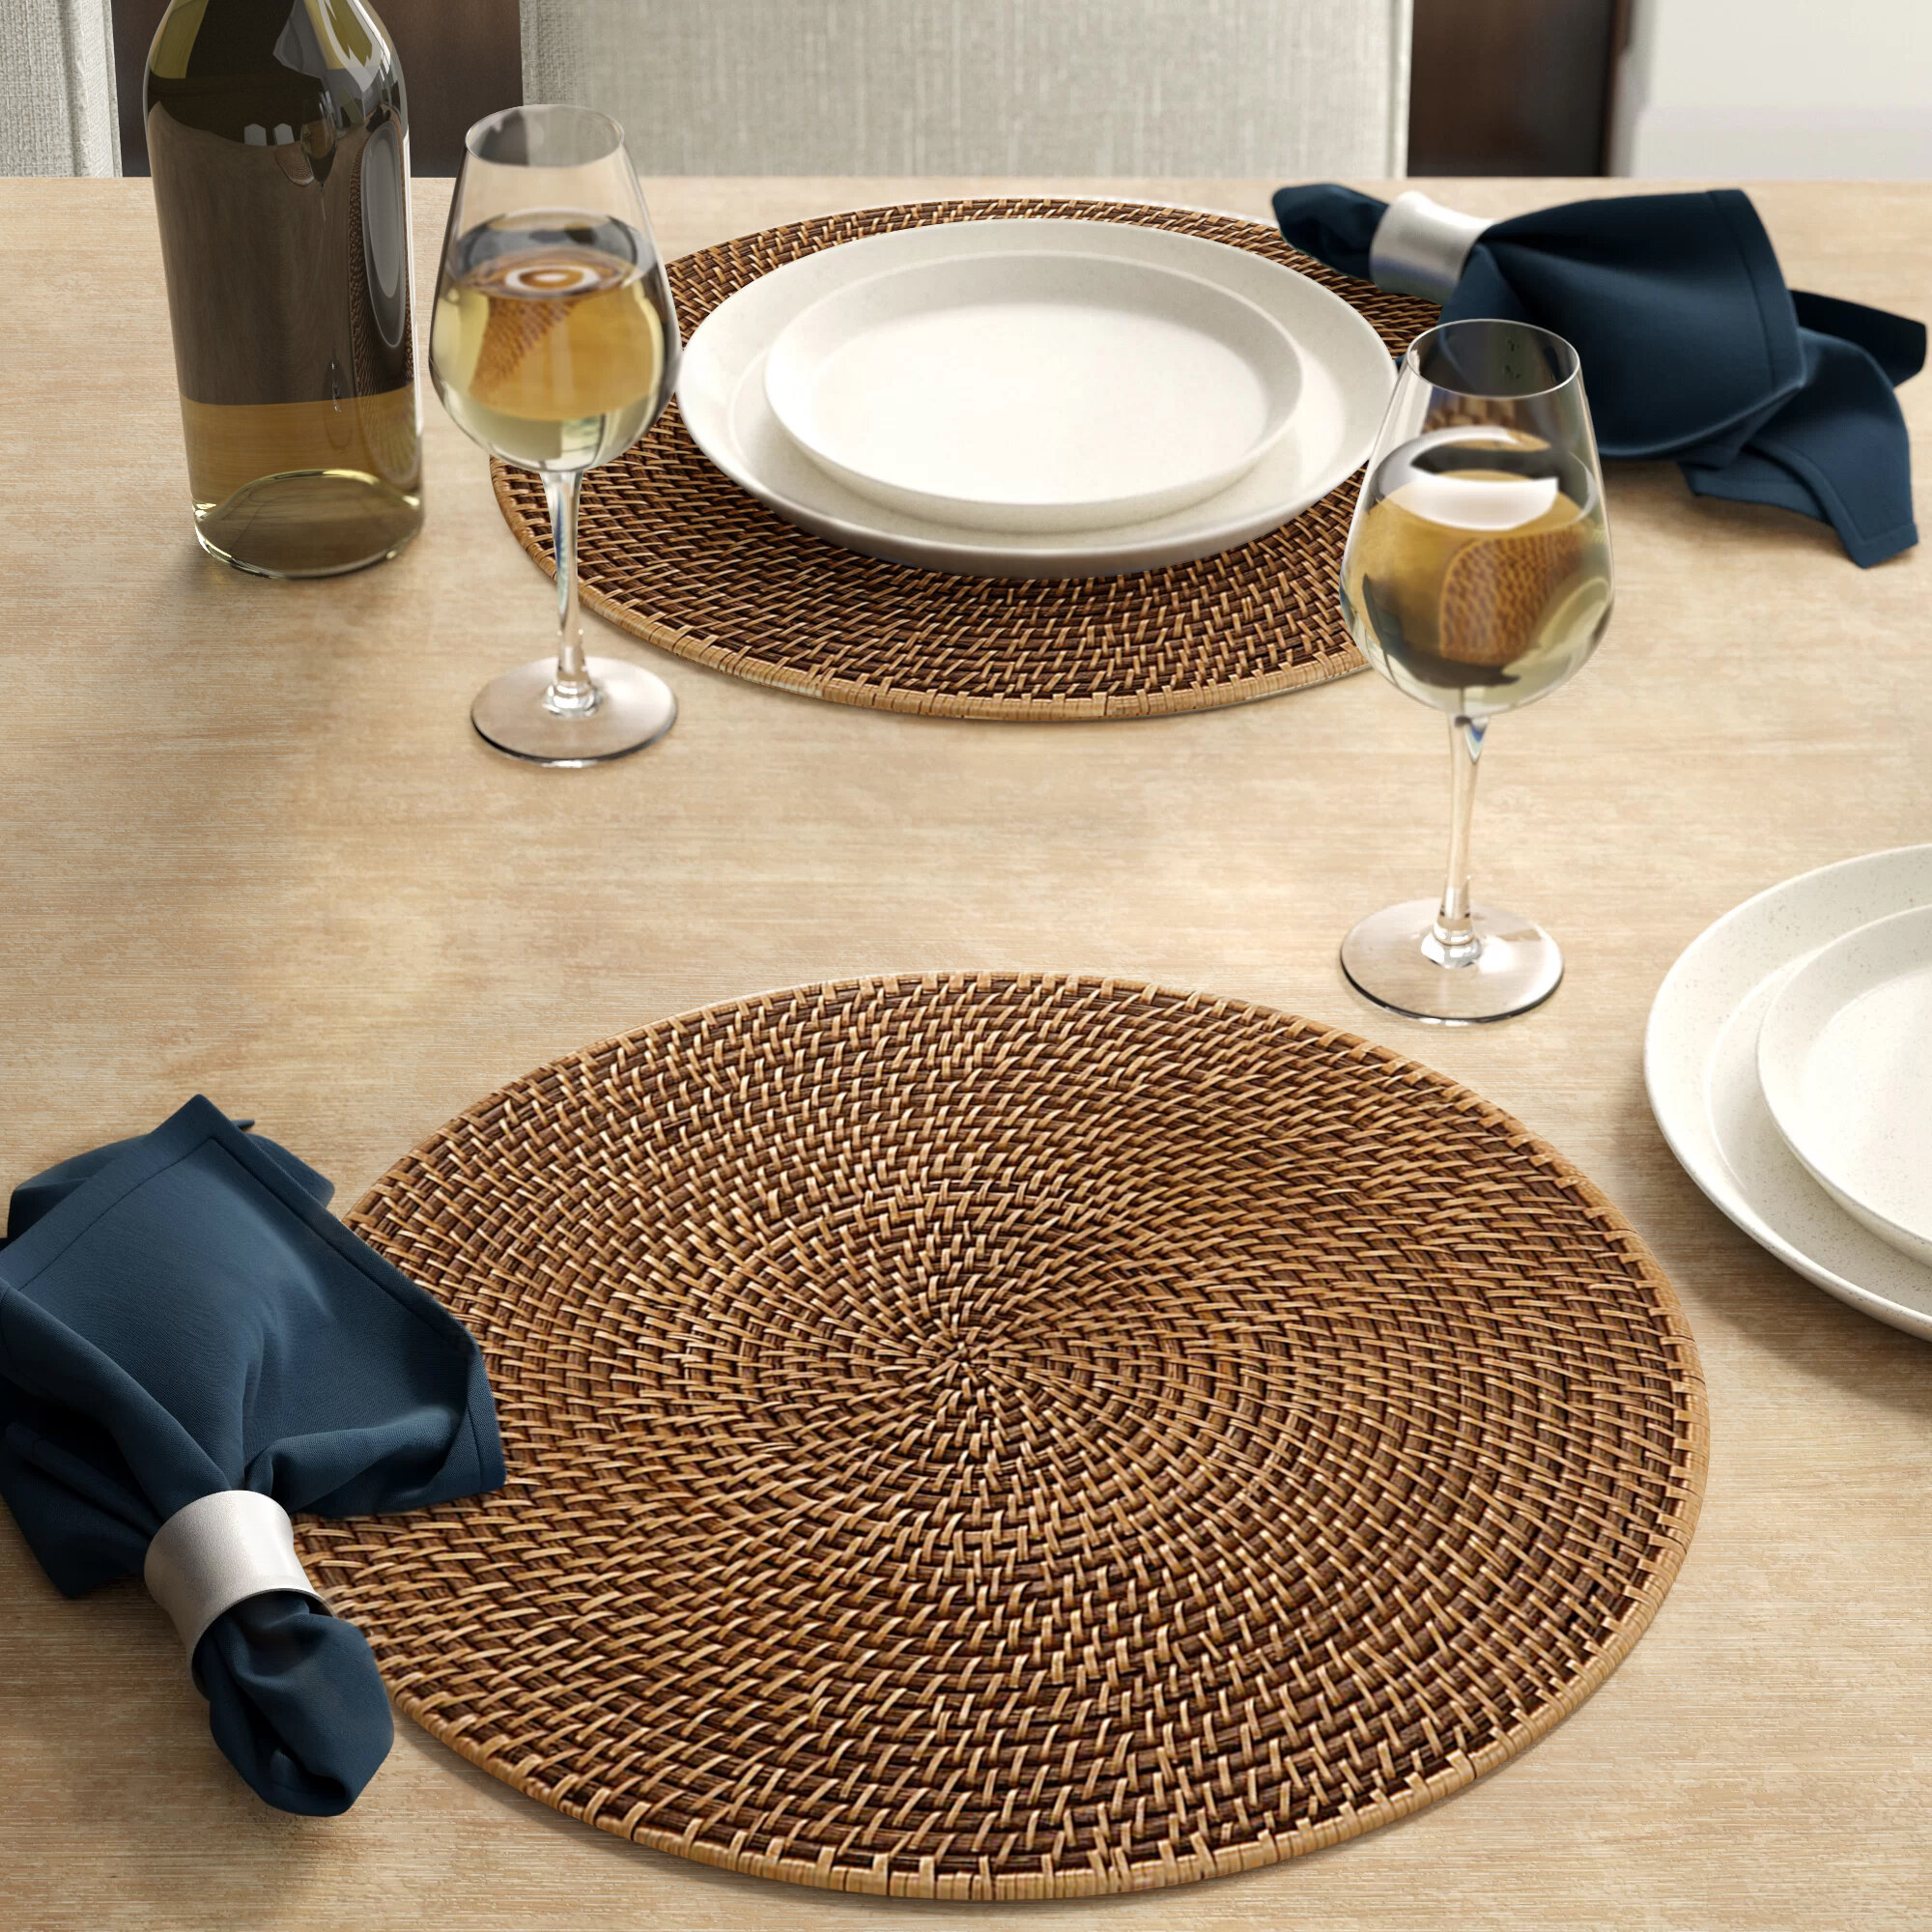 12x16inch JYMBK Rattan Woven Placemats,oval Round Table Mats,non Slip Heat Resistant Place Matv,natural Multipurpose Placemat,trivets For Hot Dishes Oval 30x40cm 